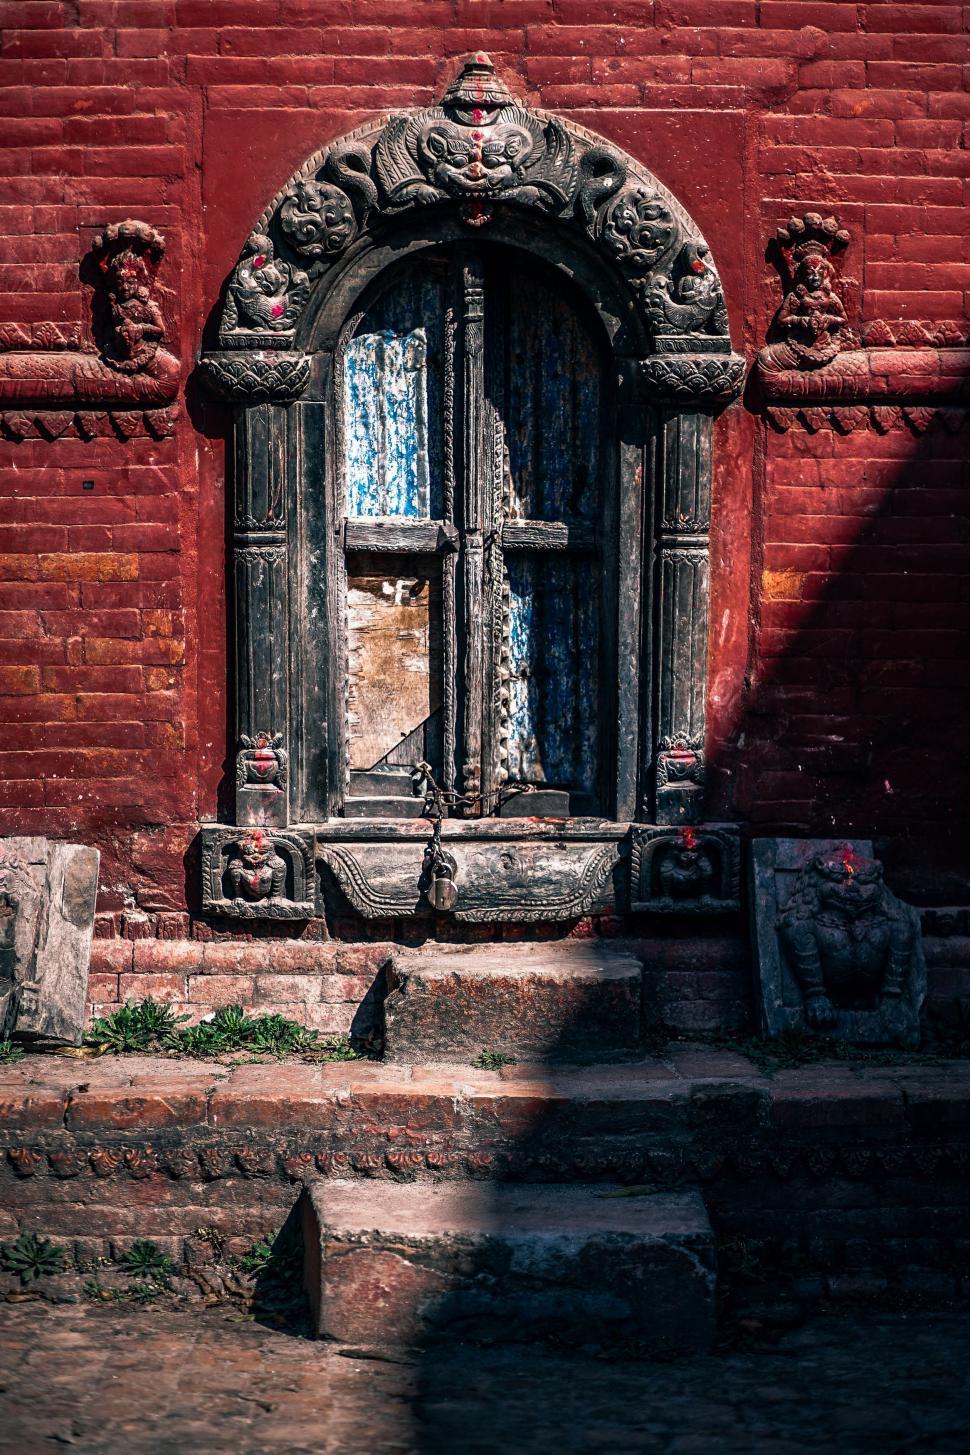 Free Image of Red Brick Building With Large Window 